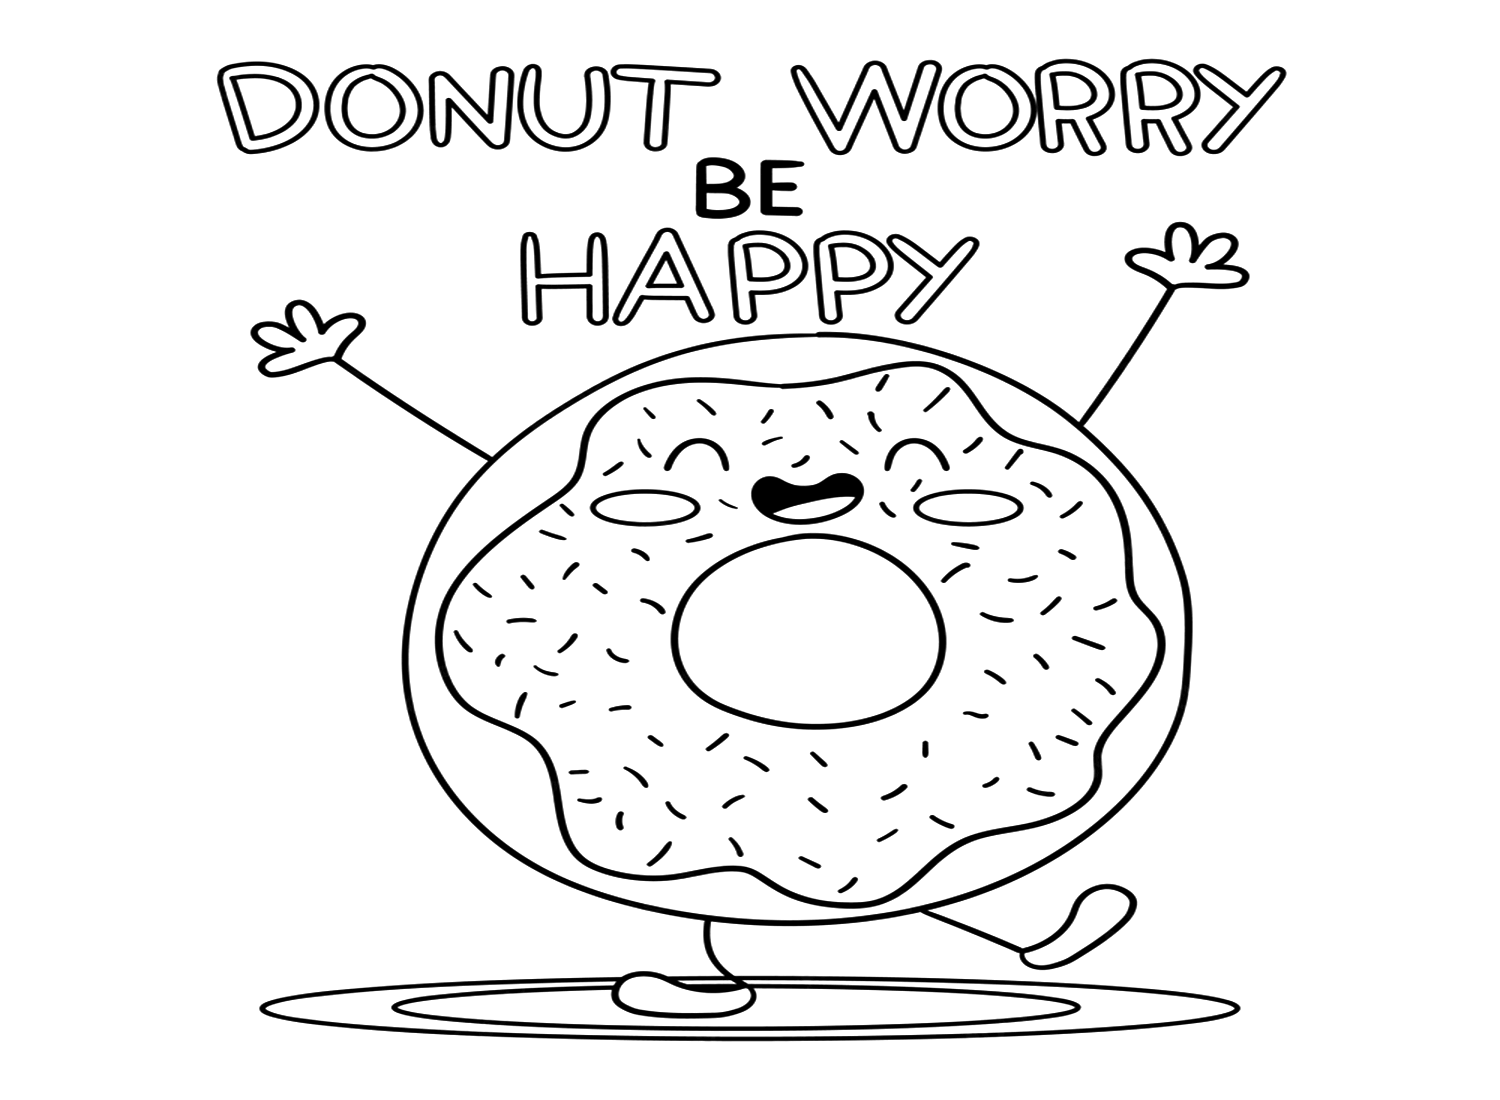 Coloriage Donut Worry Be Happy de Donut